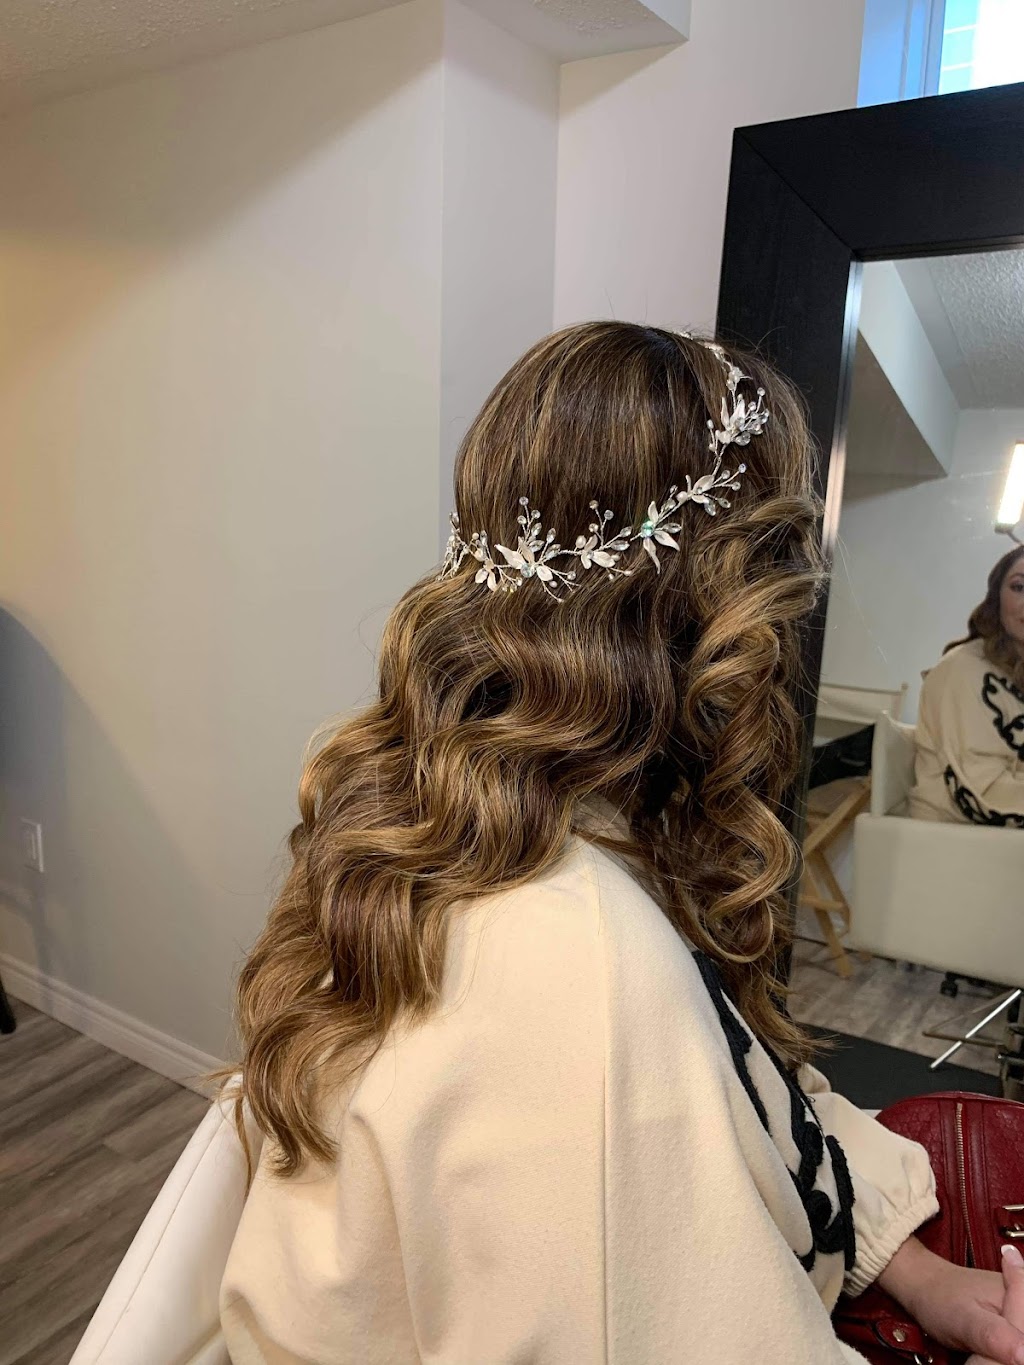 BeautiMark Pro Hair and Makeup (Lincoln) | 1 Ontario St, Beamsville, ON L0R 1B7, Canada | Phone: (905) 599-3444